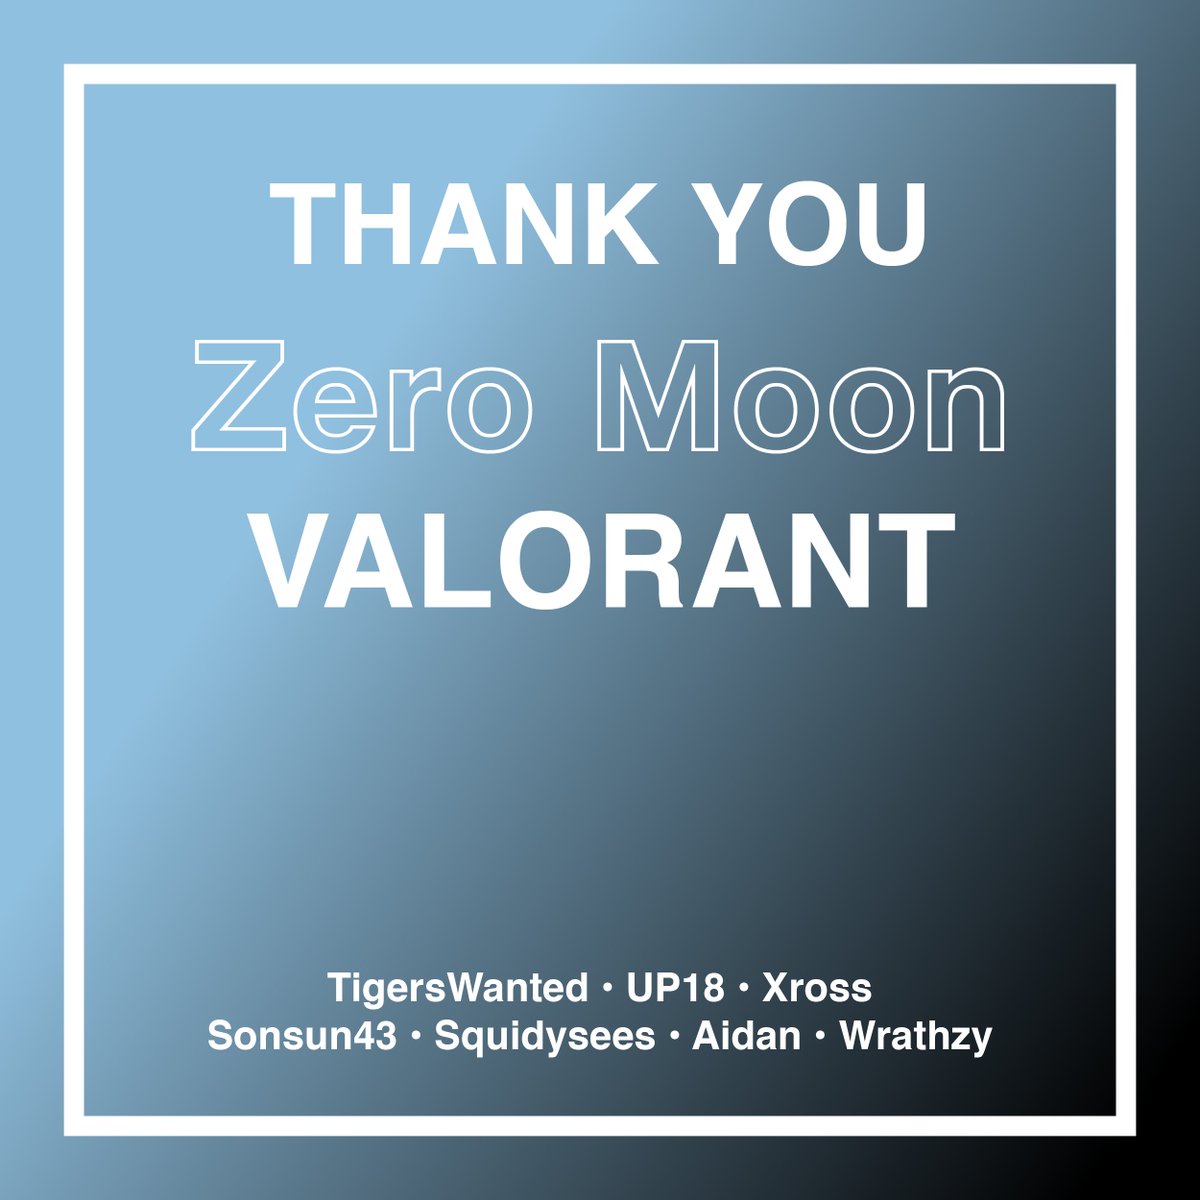 It's been a good run... Thank you to our Valorant team, we will unfortunately be releasing them in the middle of our season. #SeeTheLight